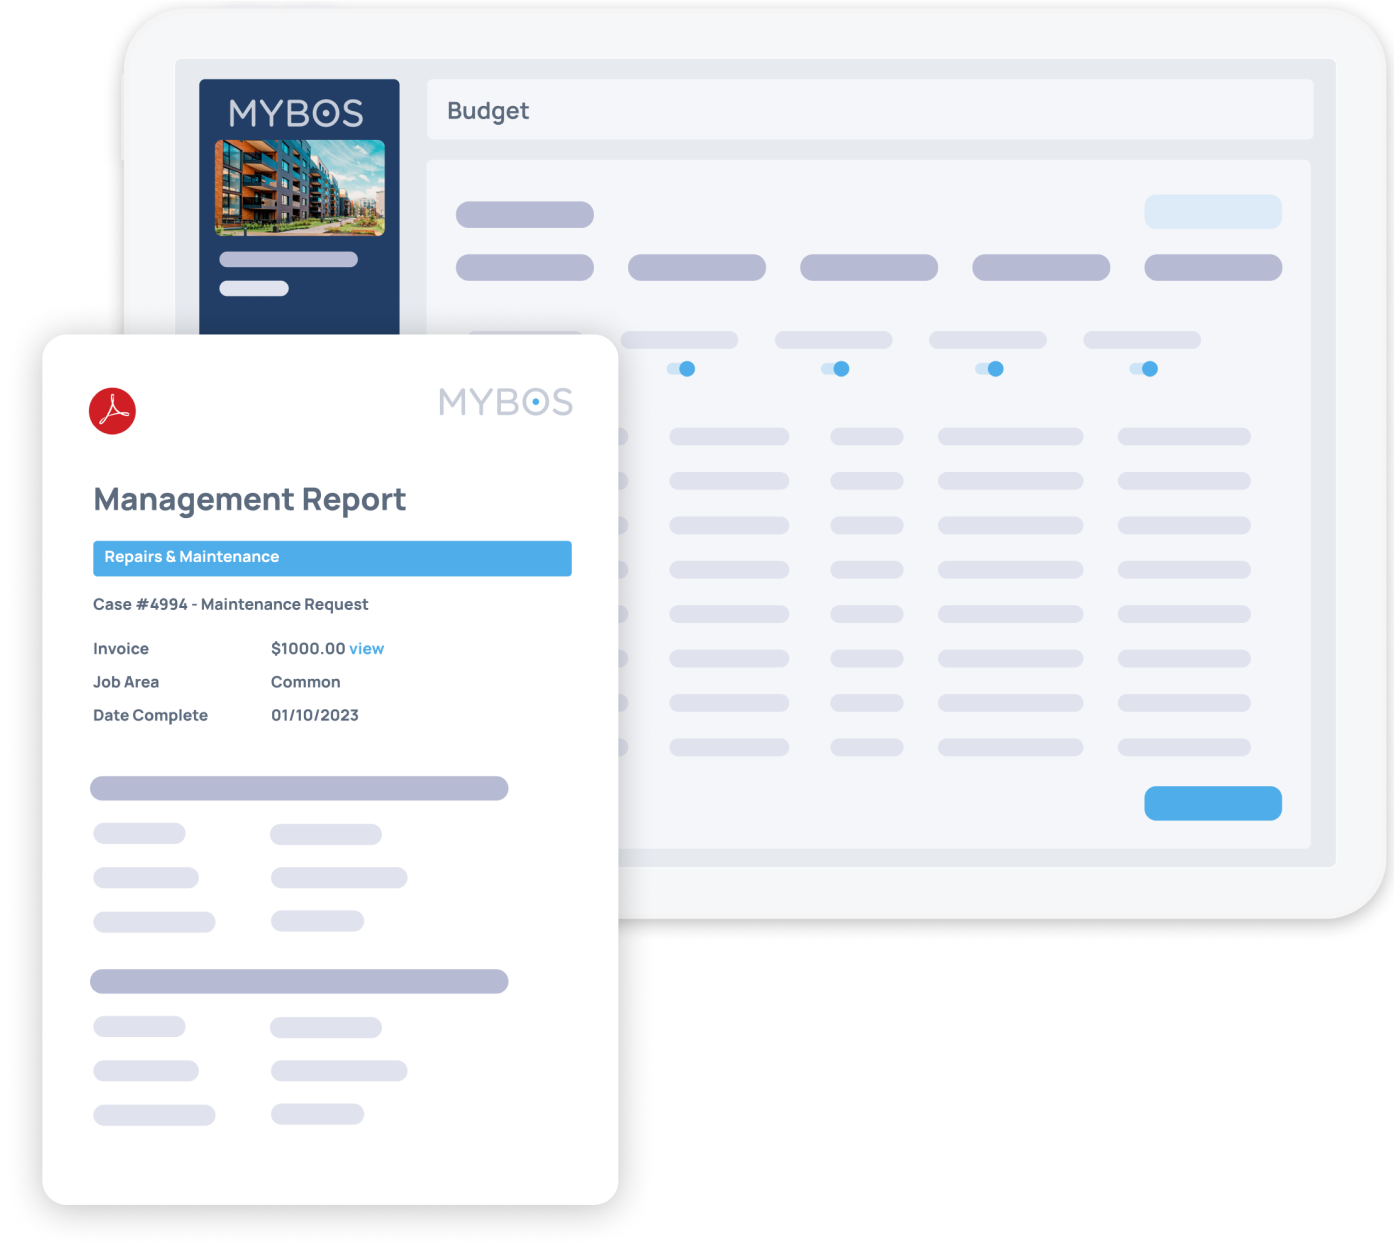 MYBOS allows for building managers to create data rich intuitive management reports to provide transparency and track performance of a building or portfolio